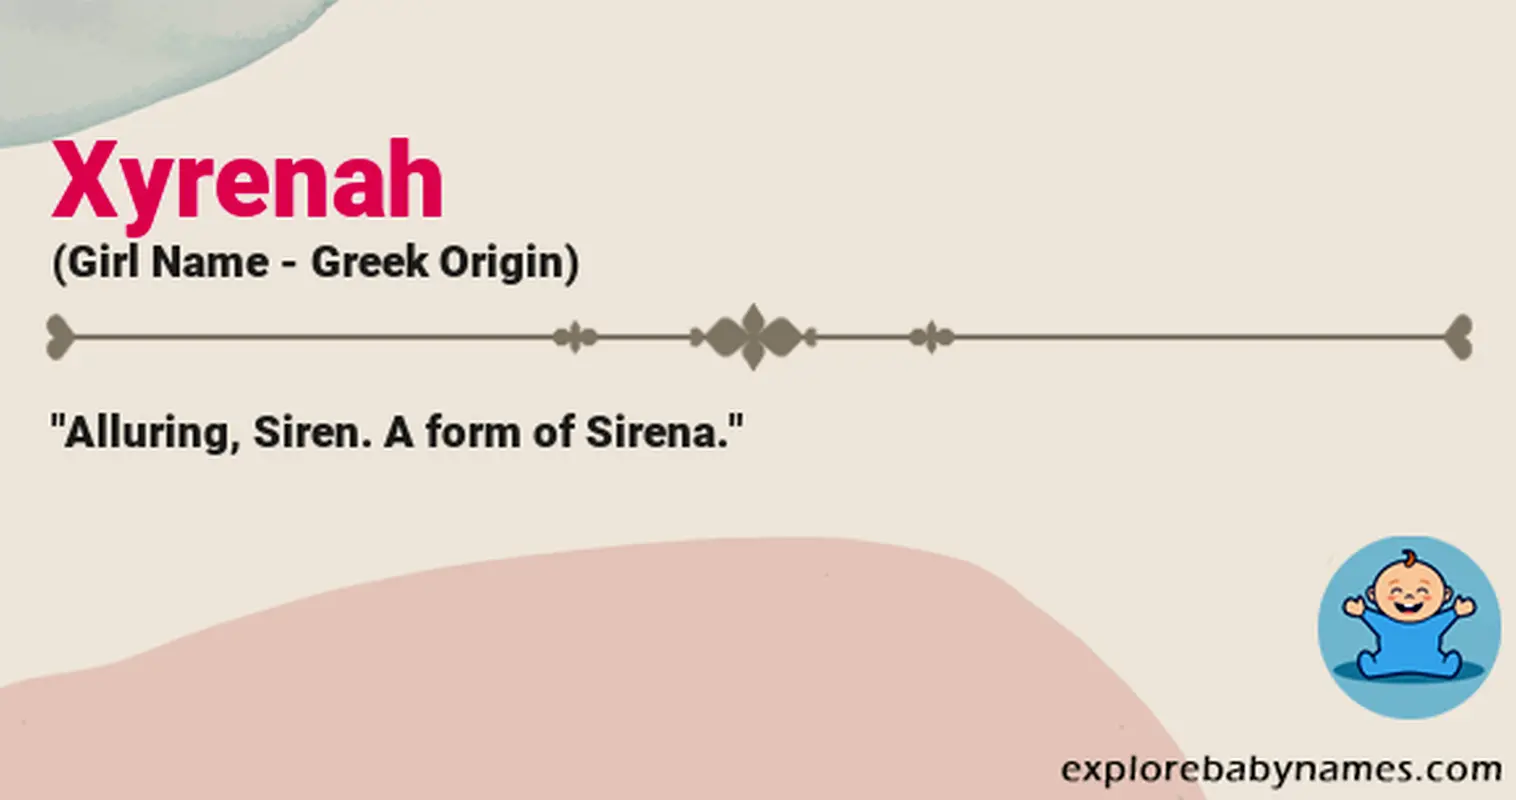 Meaning of Xyrenah